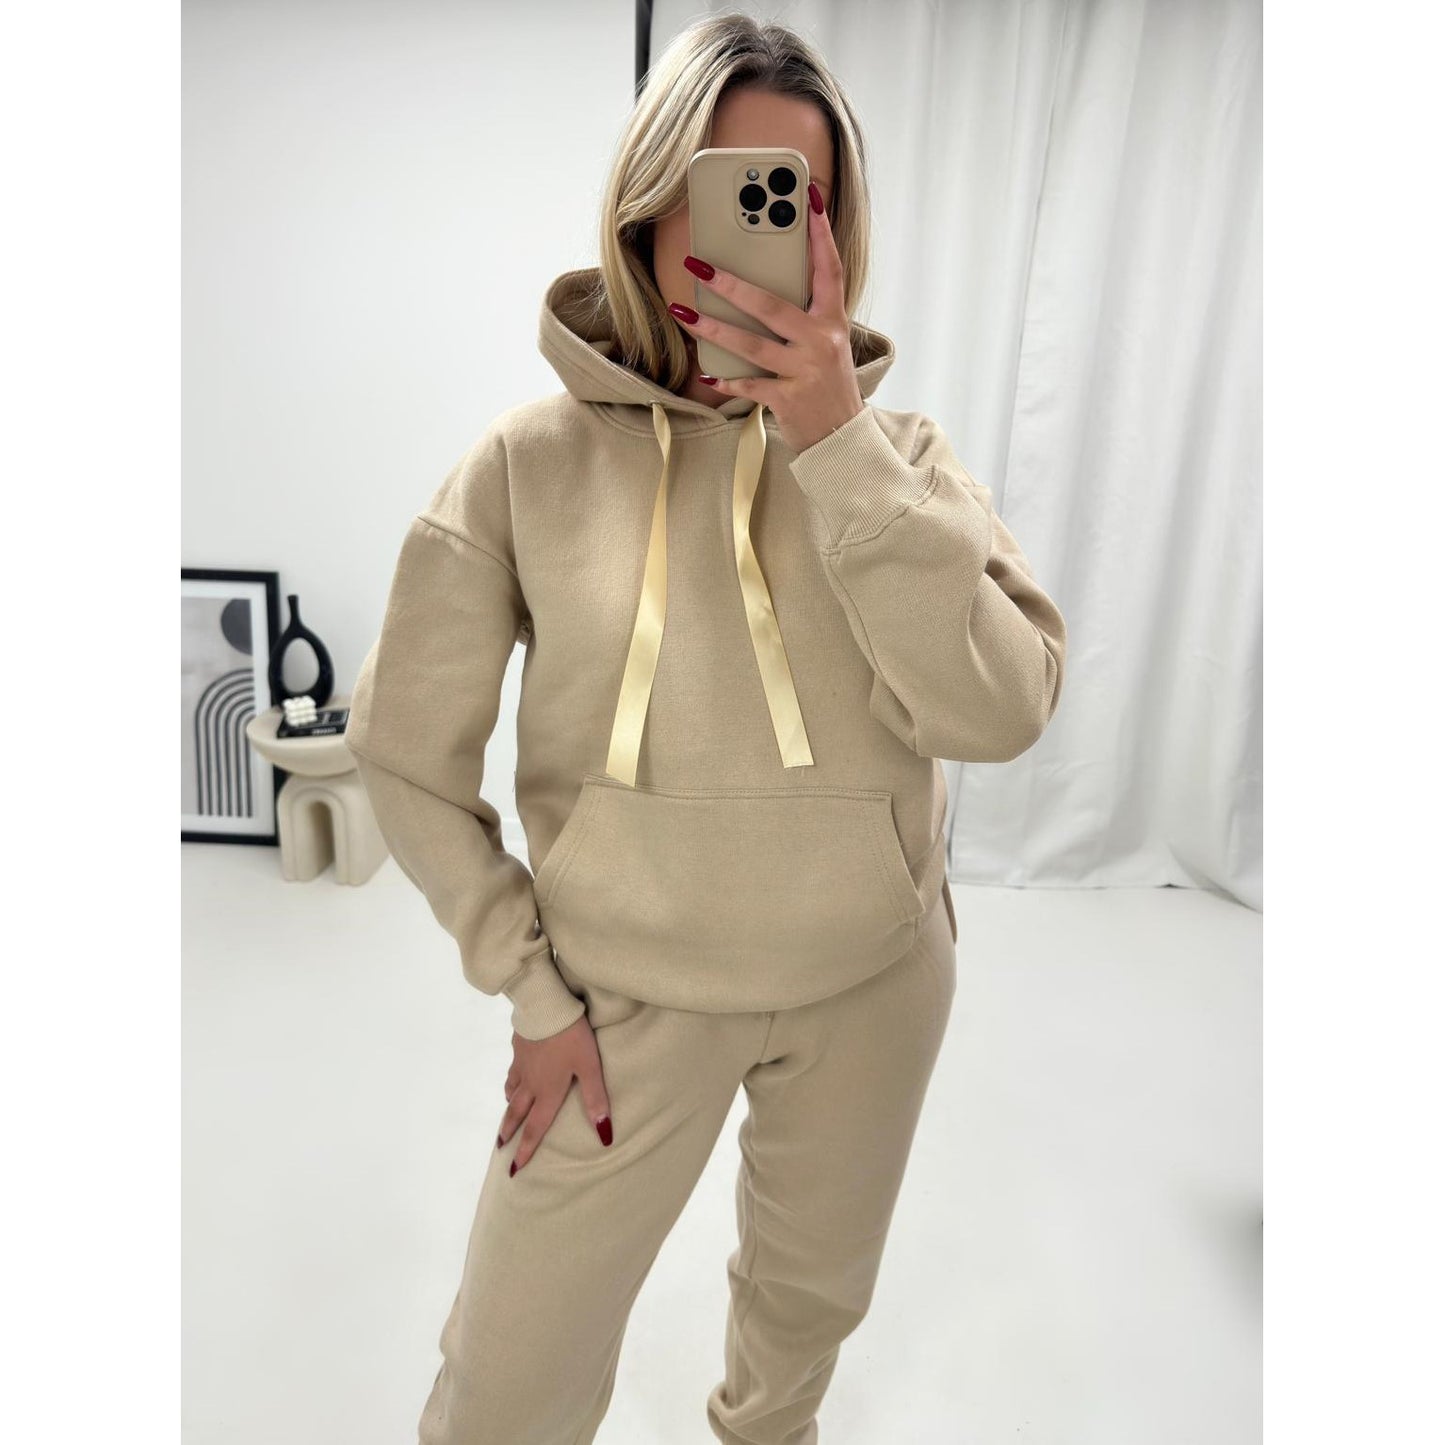 Ribbon Tie Hoody & Fitted bottom Co-ord - Lounge set in 3 Colours